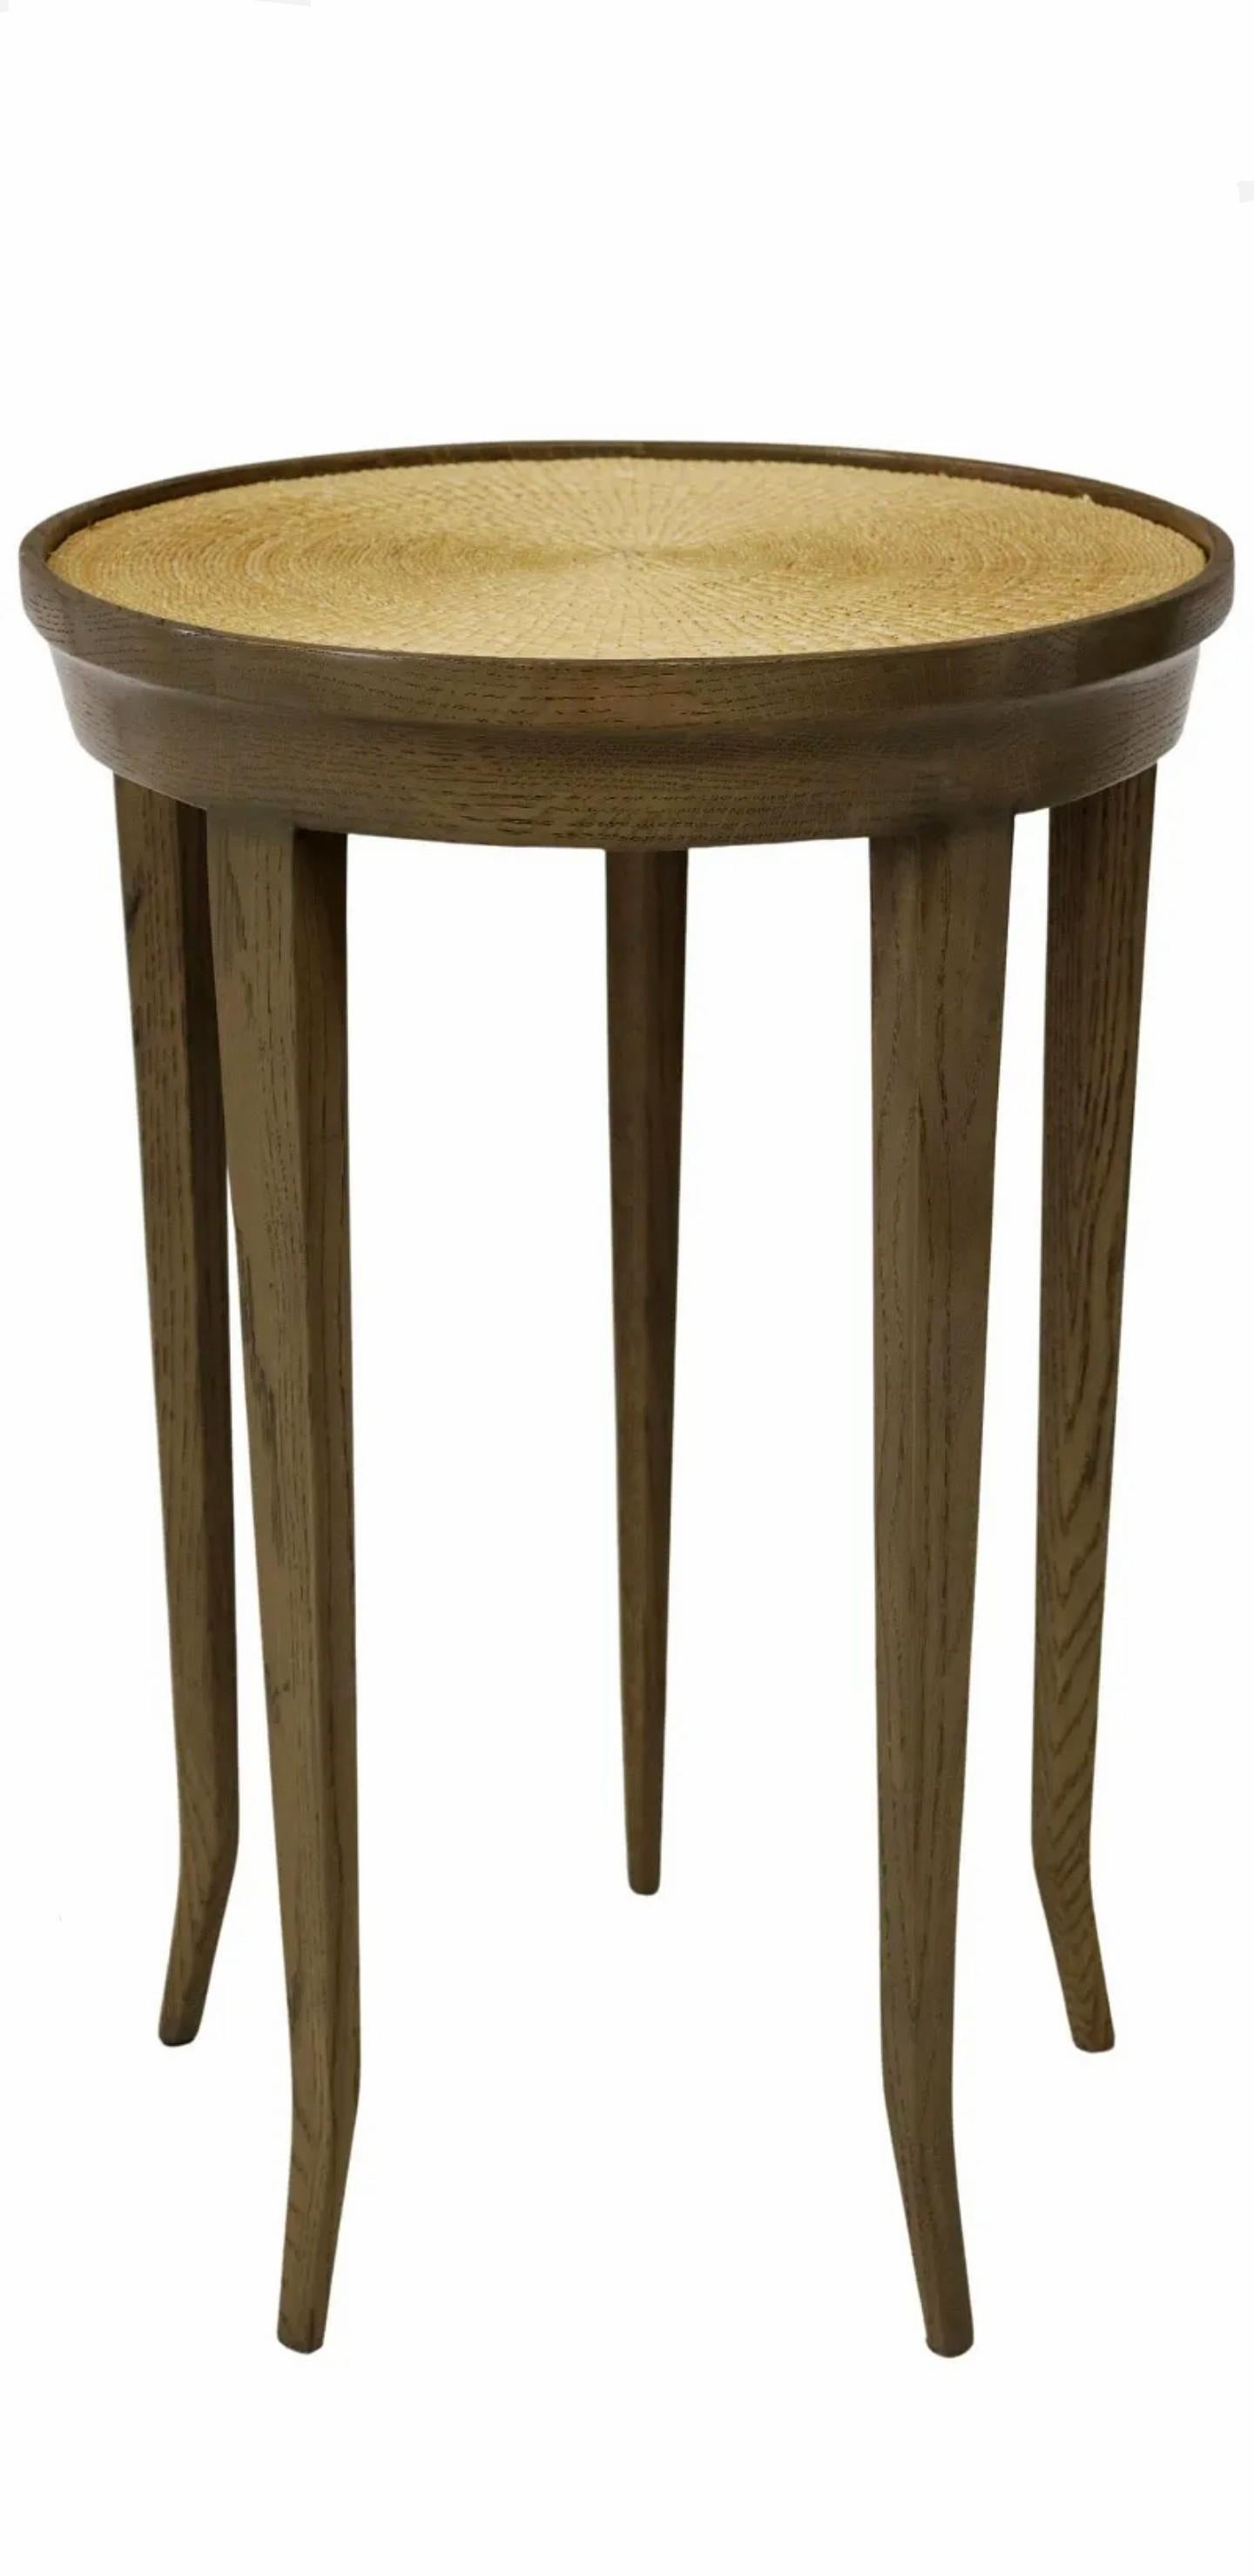 A high-quality designer five legged painted wood and wicker occasional table, 20th century, simple yet distinctive sculptural silhouette, having a circular top with inset wicker design, rising on five tapered square legs.

Provenance /